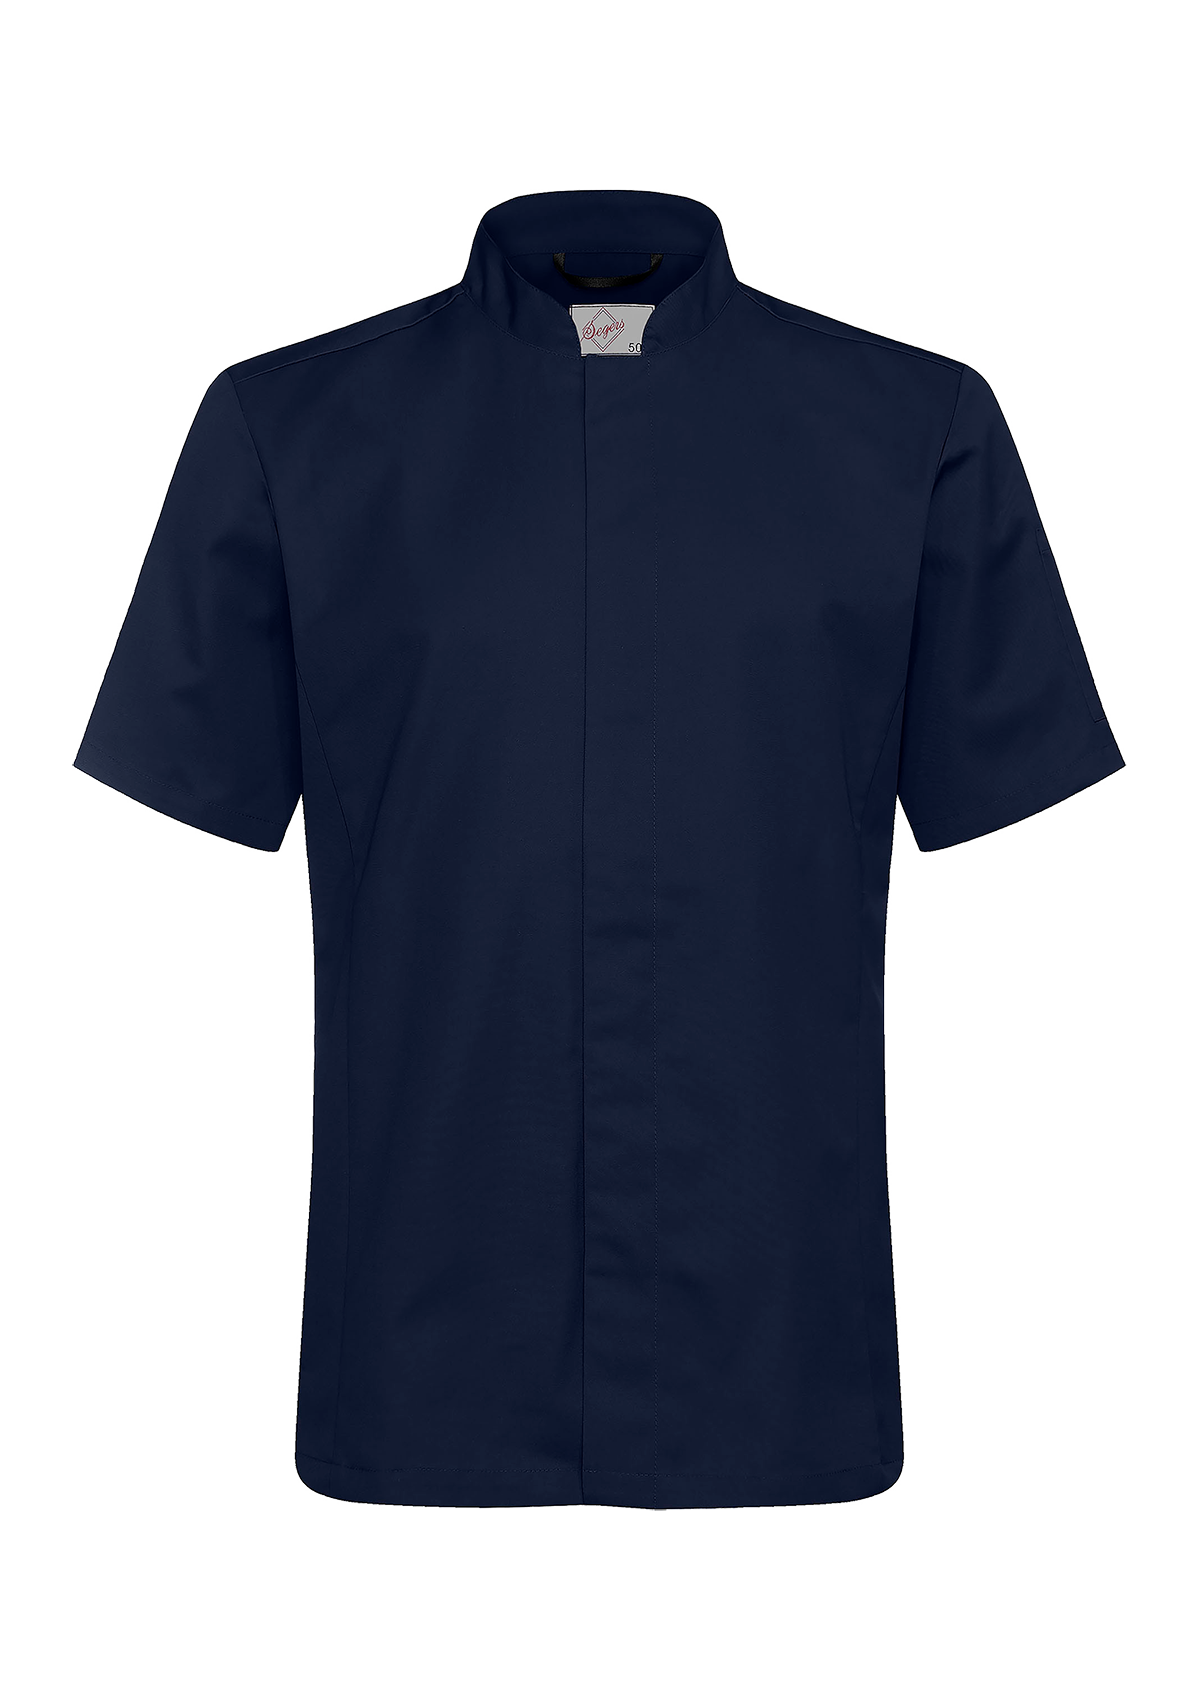 Men's Chef Shirt in slim-fit with Short Sleeves. Segers | Cookniche